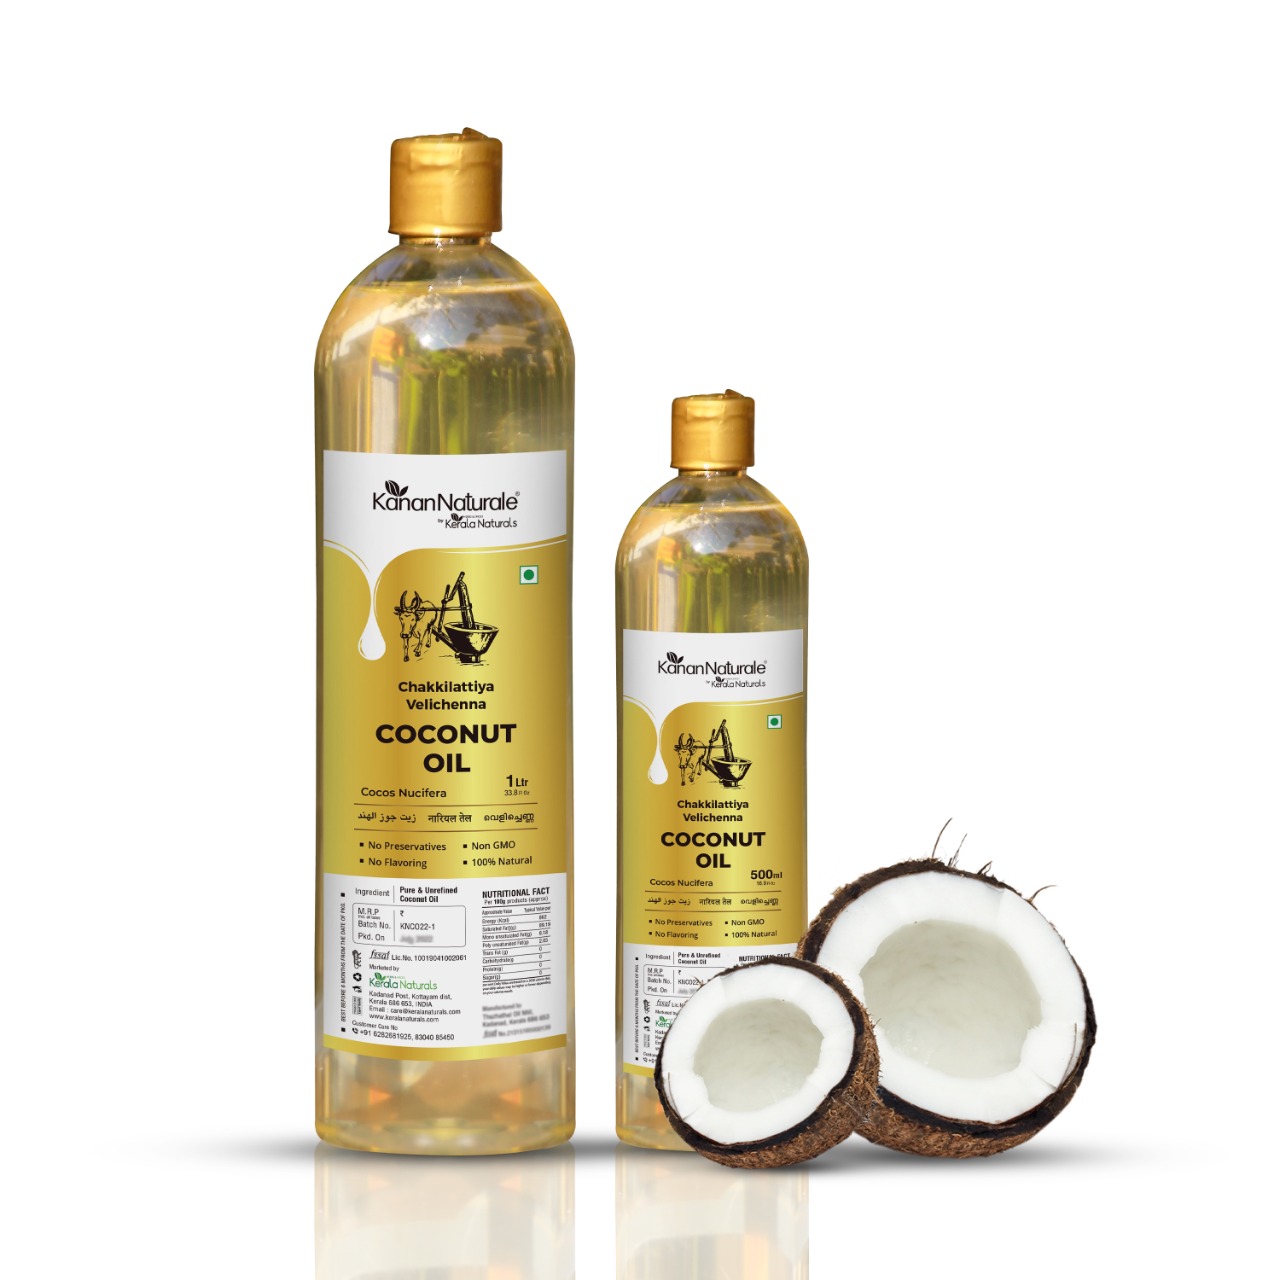 Kerala Naturals celebrates their 10th Anniversary by launching the all-new Wood Pressed, Lakdi Ghani Oil for cooking, hair, and skin care-thumnail